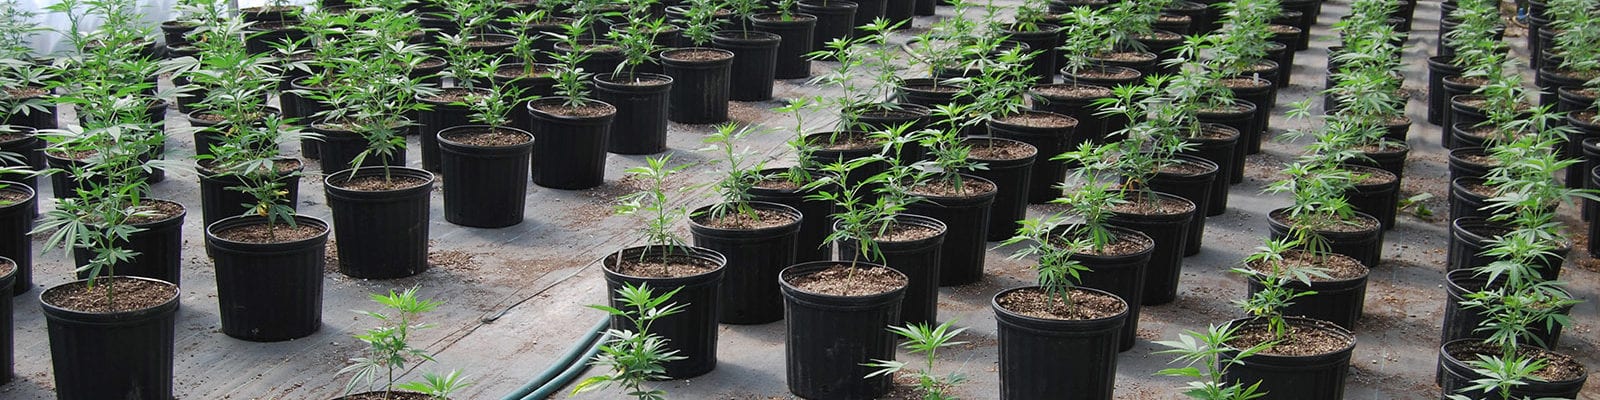 Rows of young cannabis plants growing in a greenhouse environment.